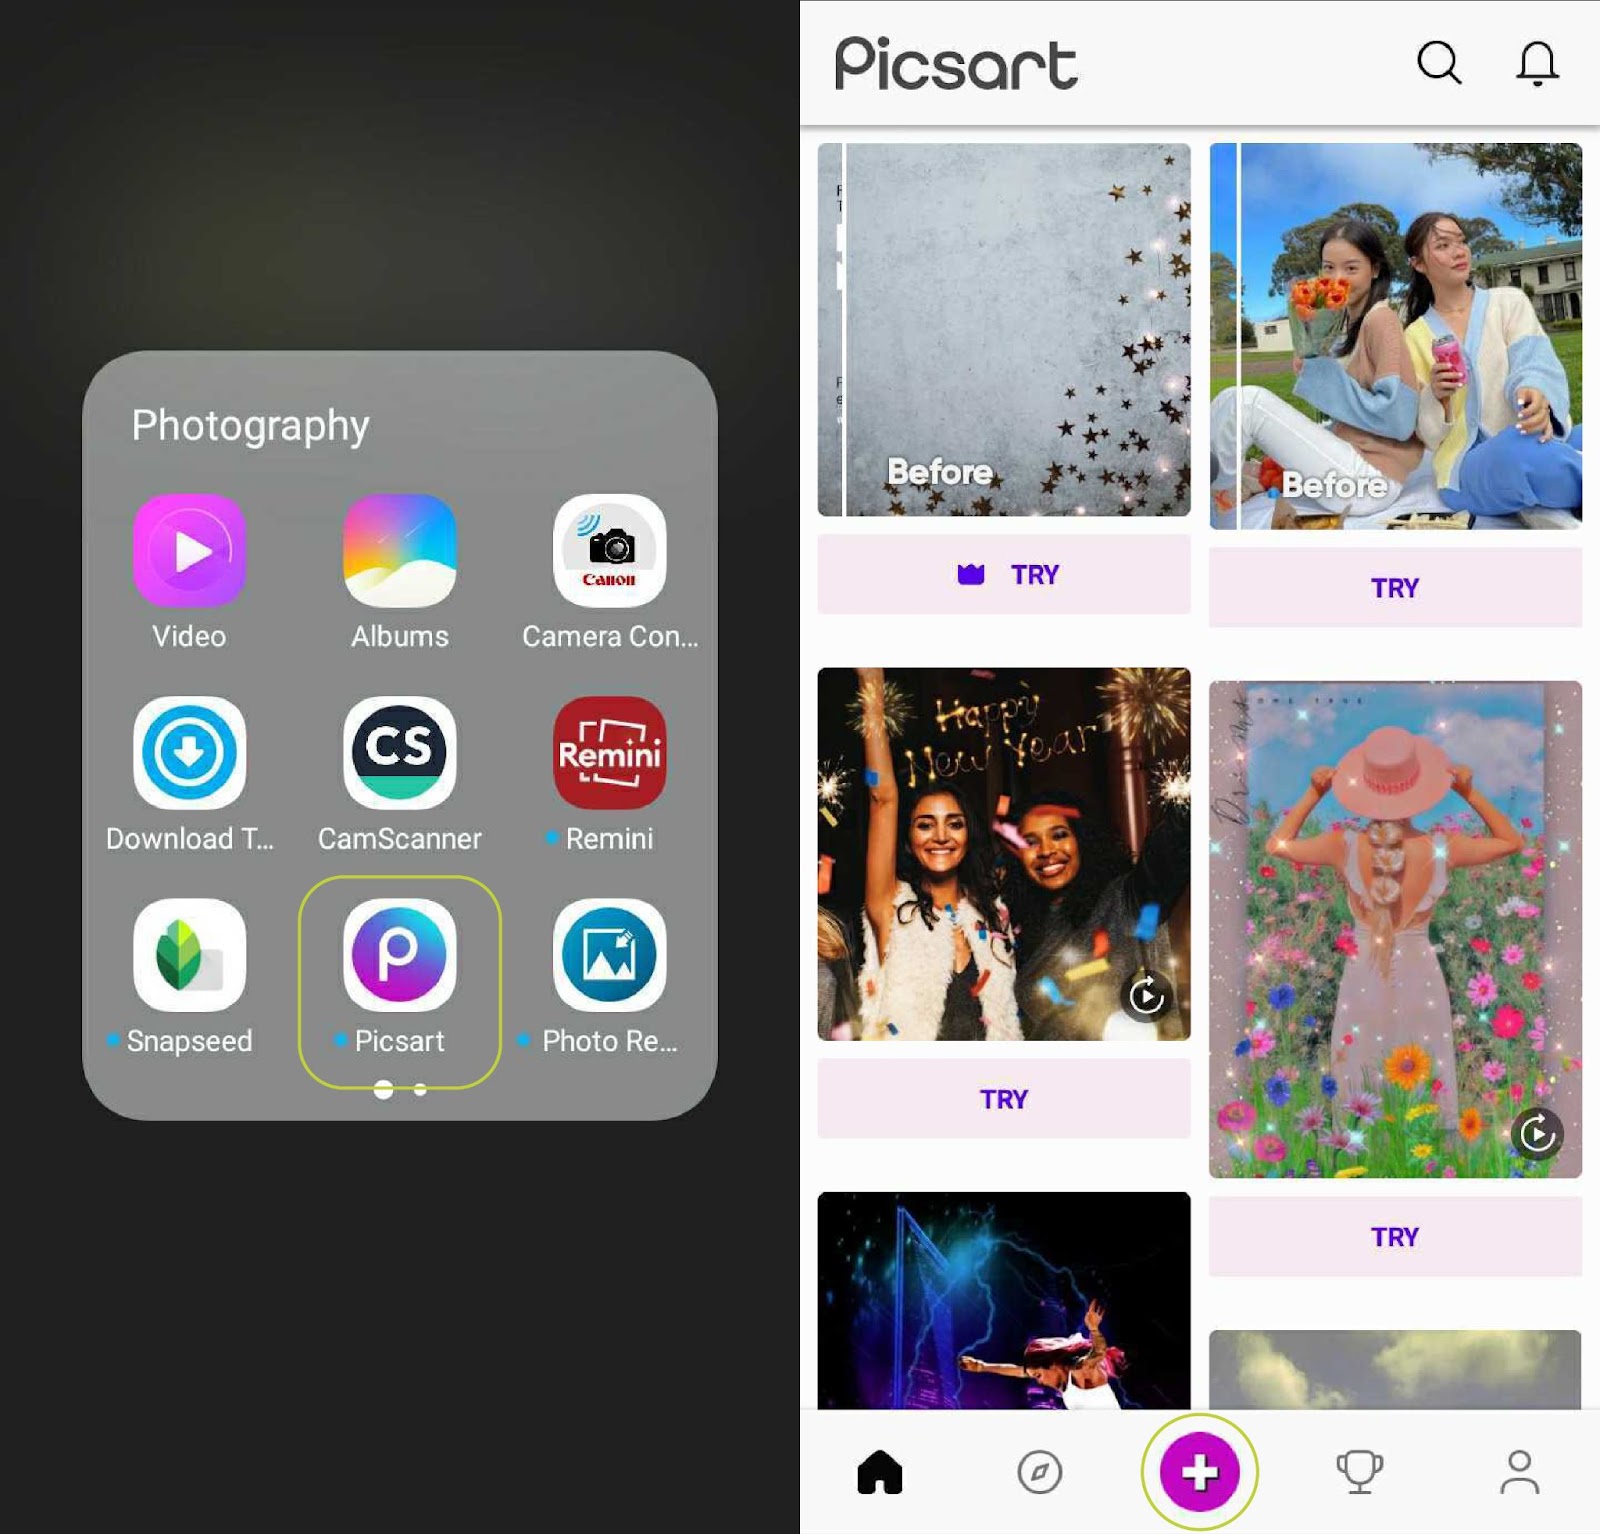 Tap on PicsArt to launch the app then tap on the + sign on the bottom of the screen.